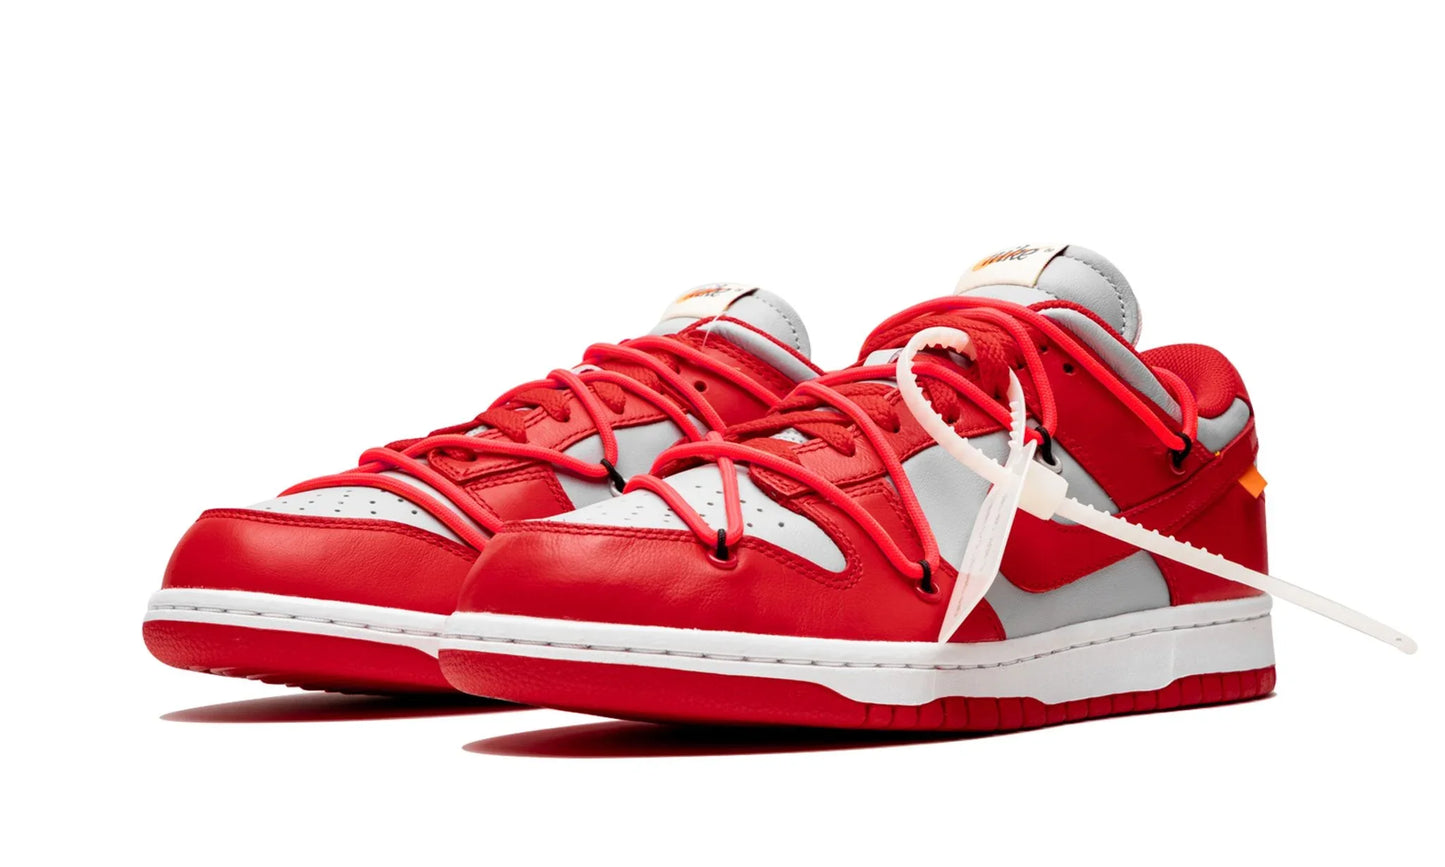 NIKE X OFF-WHITE DUNK LOW "Off-White - University Red"